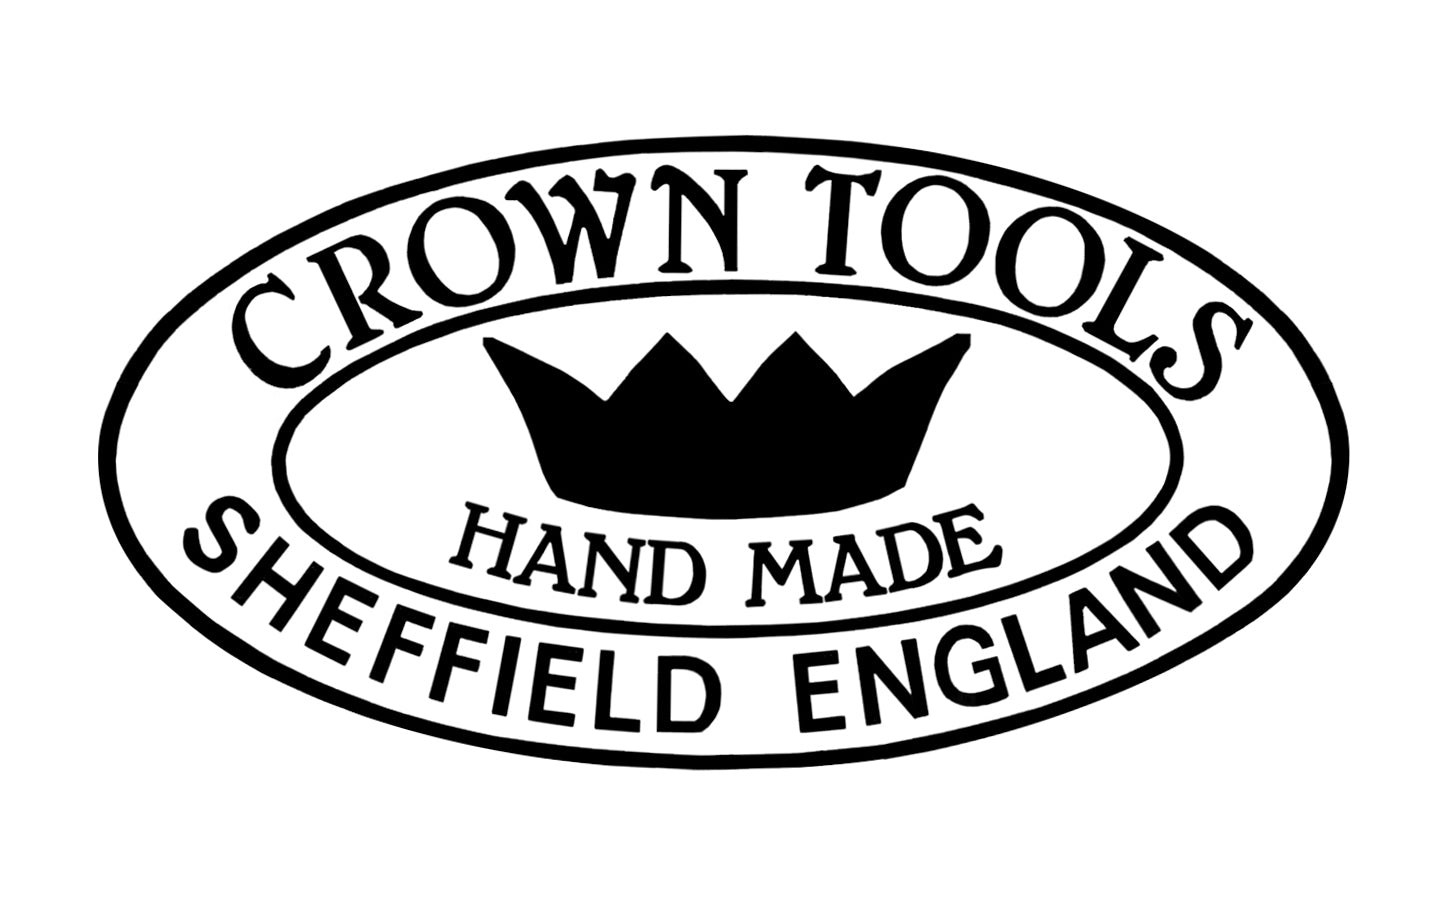 3-1/2" Miniature Beechwood mallet made by Crown Tools in England. Model 105M. High quality mallet is very sturdy & durable. Manufactured from the finest kiln dried Beech. Great for woodworking applications, chisel work, cabinet making, boat building, & other uses. Handle is not lacquered. Made in Sheffield, England. 